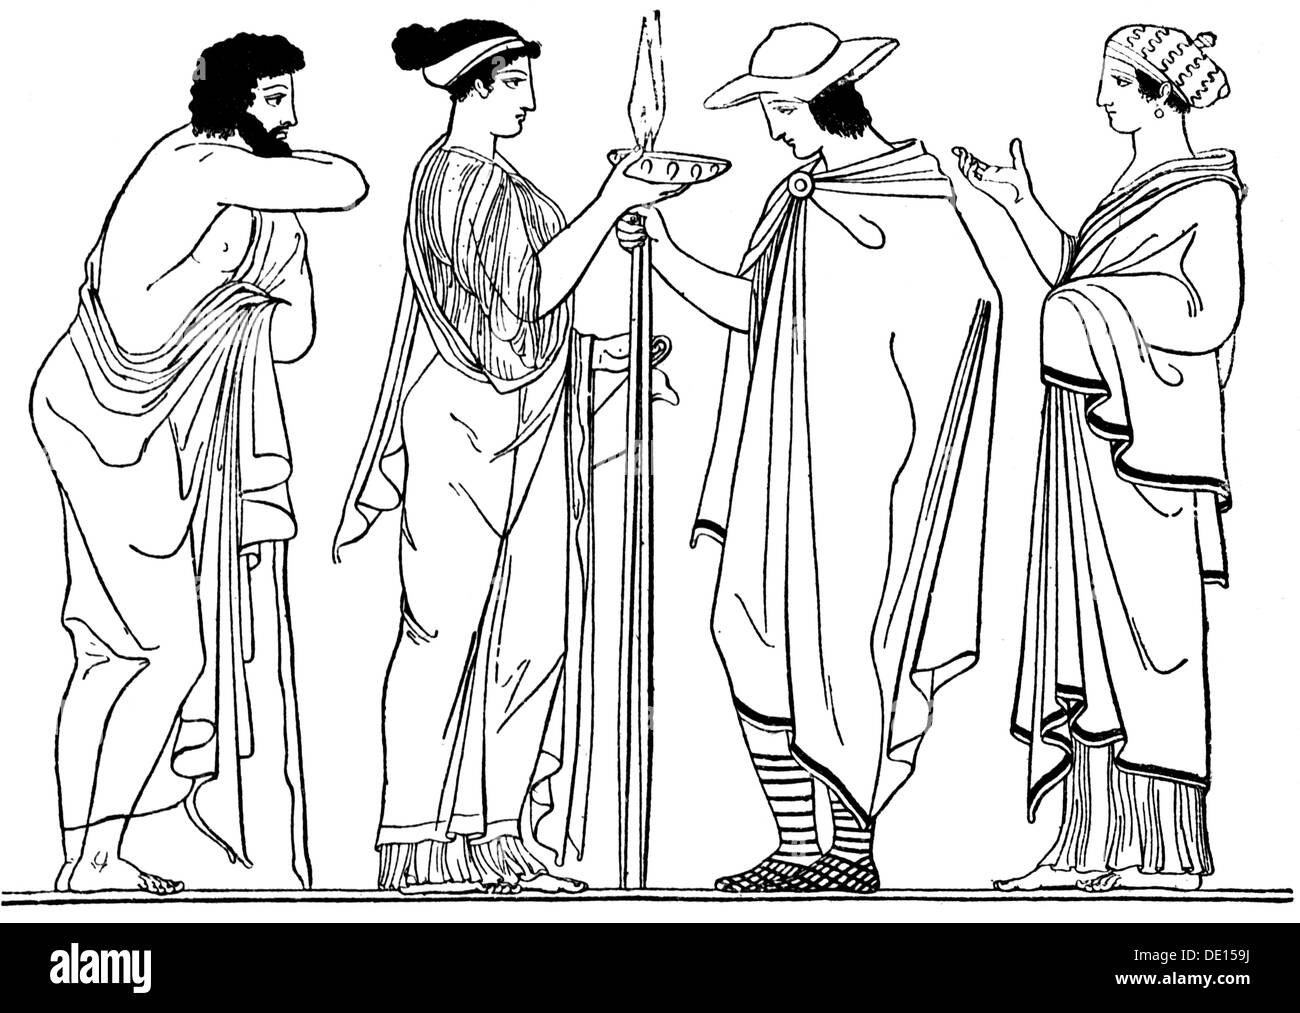 ancient world,Greece,goodbye of an ephebos,after vase painting,wood engraving,19th century,19th century,graphic,graphics,Greek,Grecian,clothes,outfit,outfits,dress,dresses,headpiece,headpieces,hat,hats,cape,capes,weapon,weapons,arms,spear,spears,reach,reaching,hand,handing,bowl,bowls,full length,standing,ladies' fashion,women's clothing,fashion for women,tunic,soldier,soldiers,warrior,warriors,goodbye,goodby,farewell,youngling,younglings,ancient world,ancient times,historic,historical,woman,women,female,man,Additional-Rights-Clearences-Not Available Stock Photo